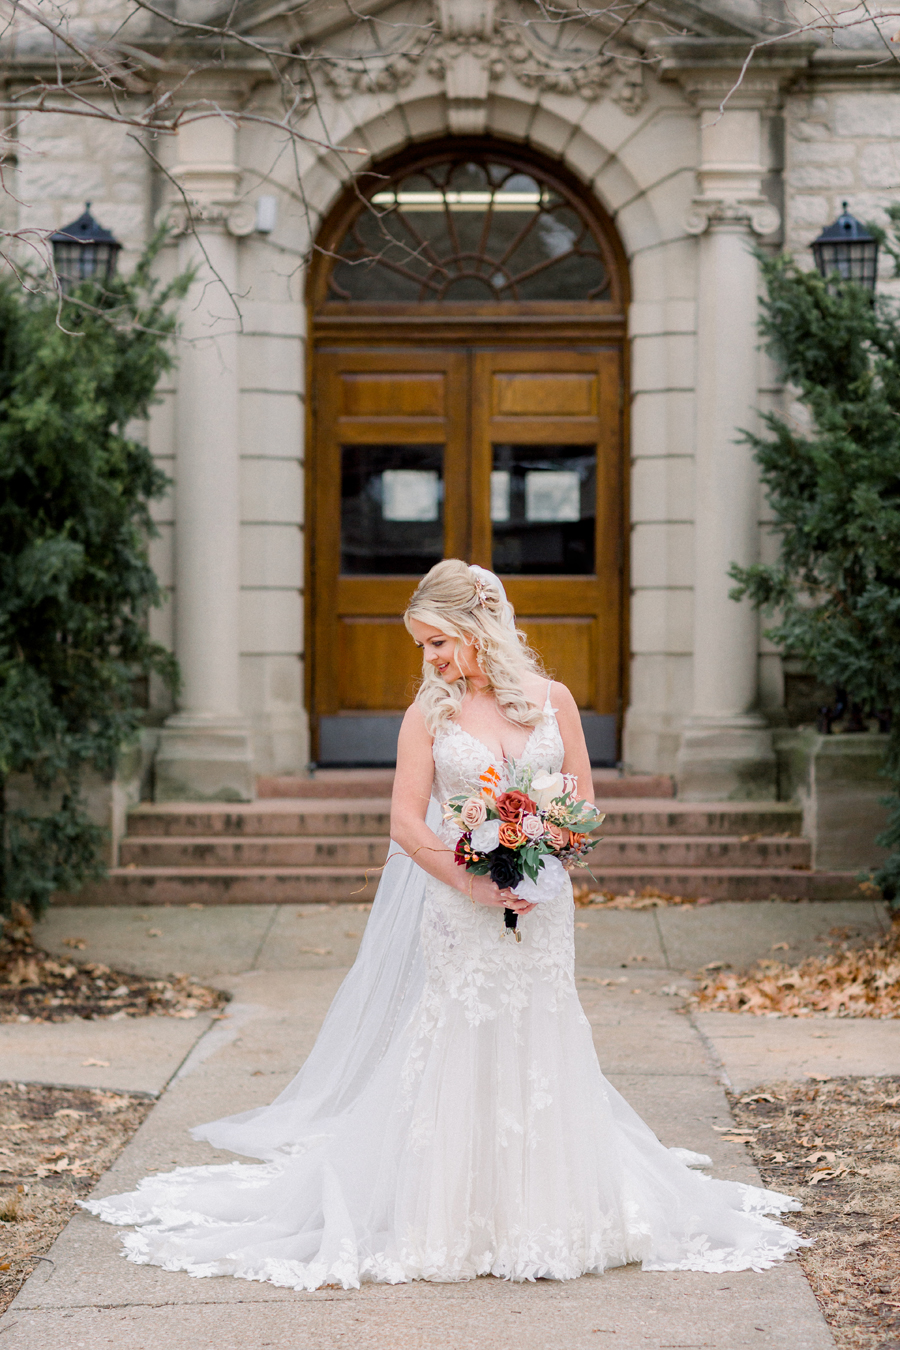 The bride poses for portraits on Mizzou campus before her Atrium on Tenth wedding in Columbia, Missouri by Love Tree Studios.